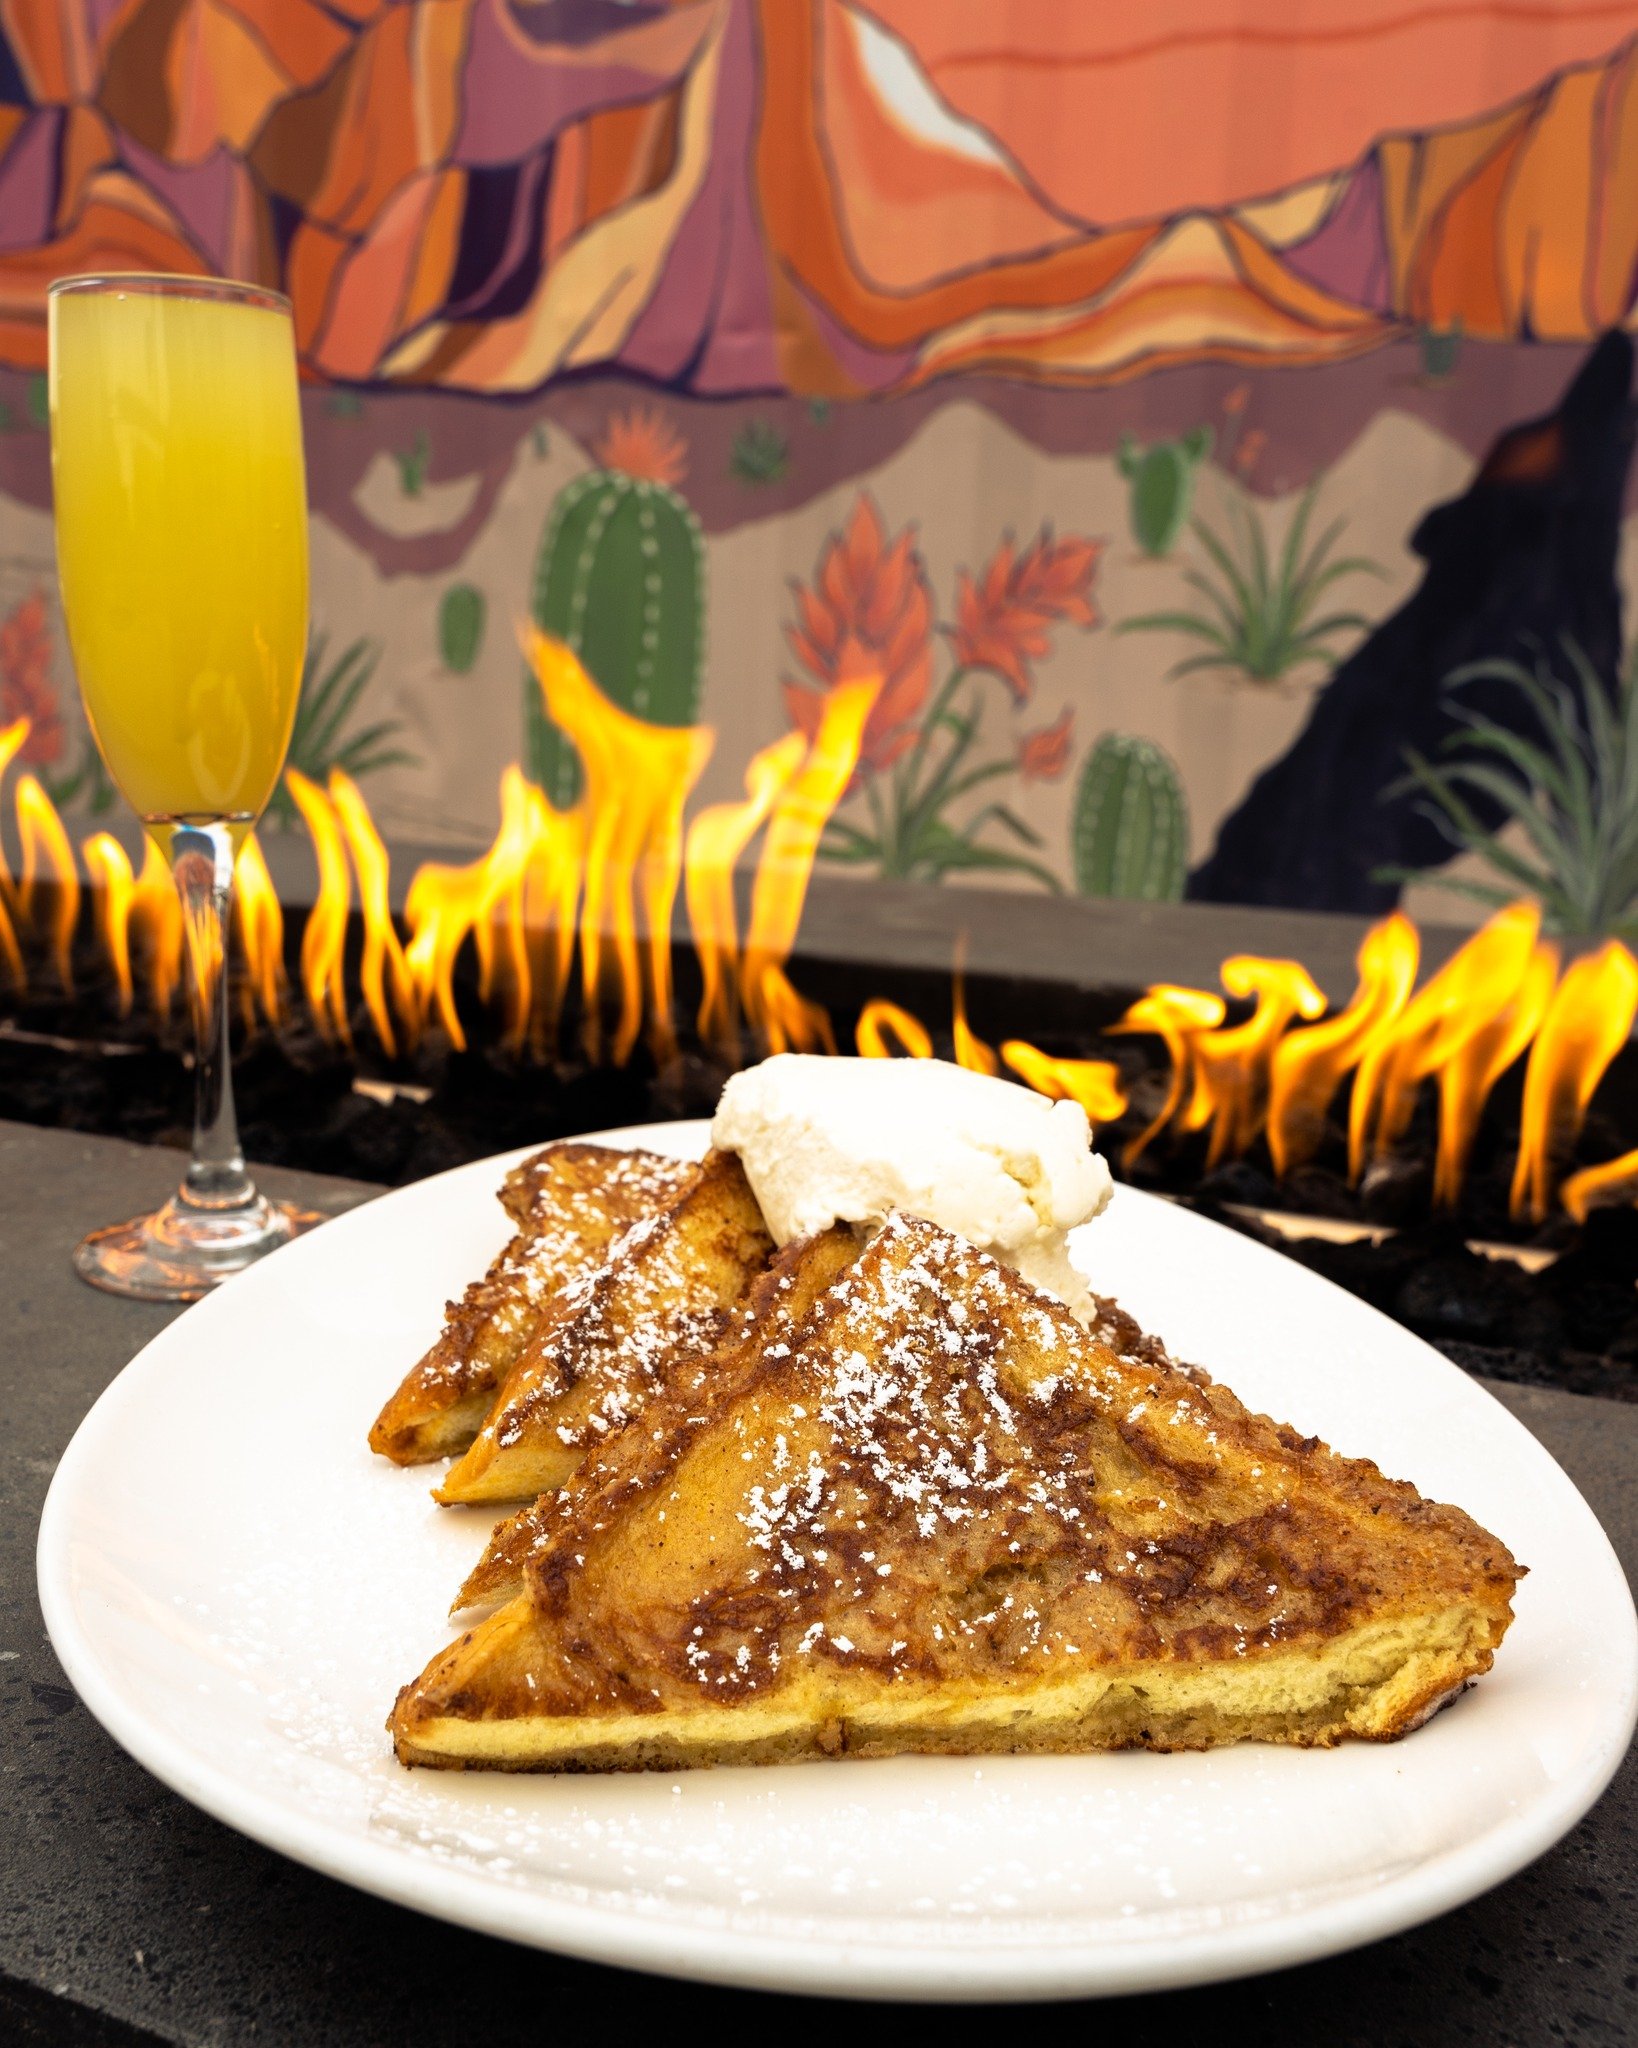 This Sunday Funday, we have something to celebrate - French Toast is back for Brunch!!

Brunch is served every Saturday and Sunday from 10AM to 2PM.

#UtahBar #SundayFunday #Millcreek #Brickyard #DogFriendly